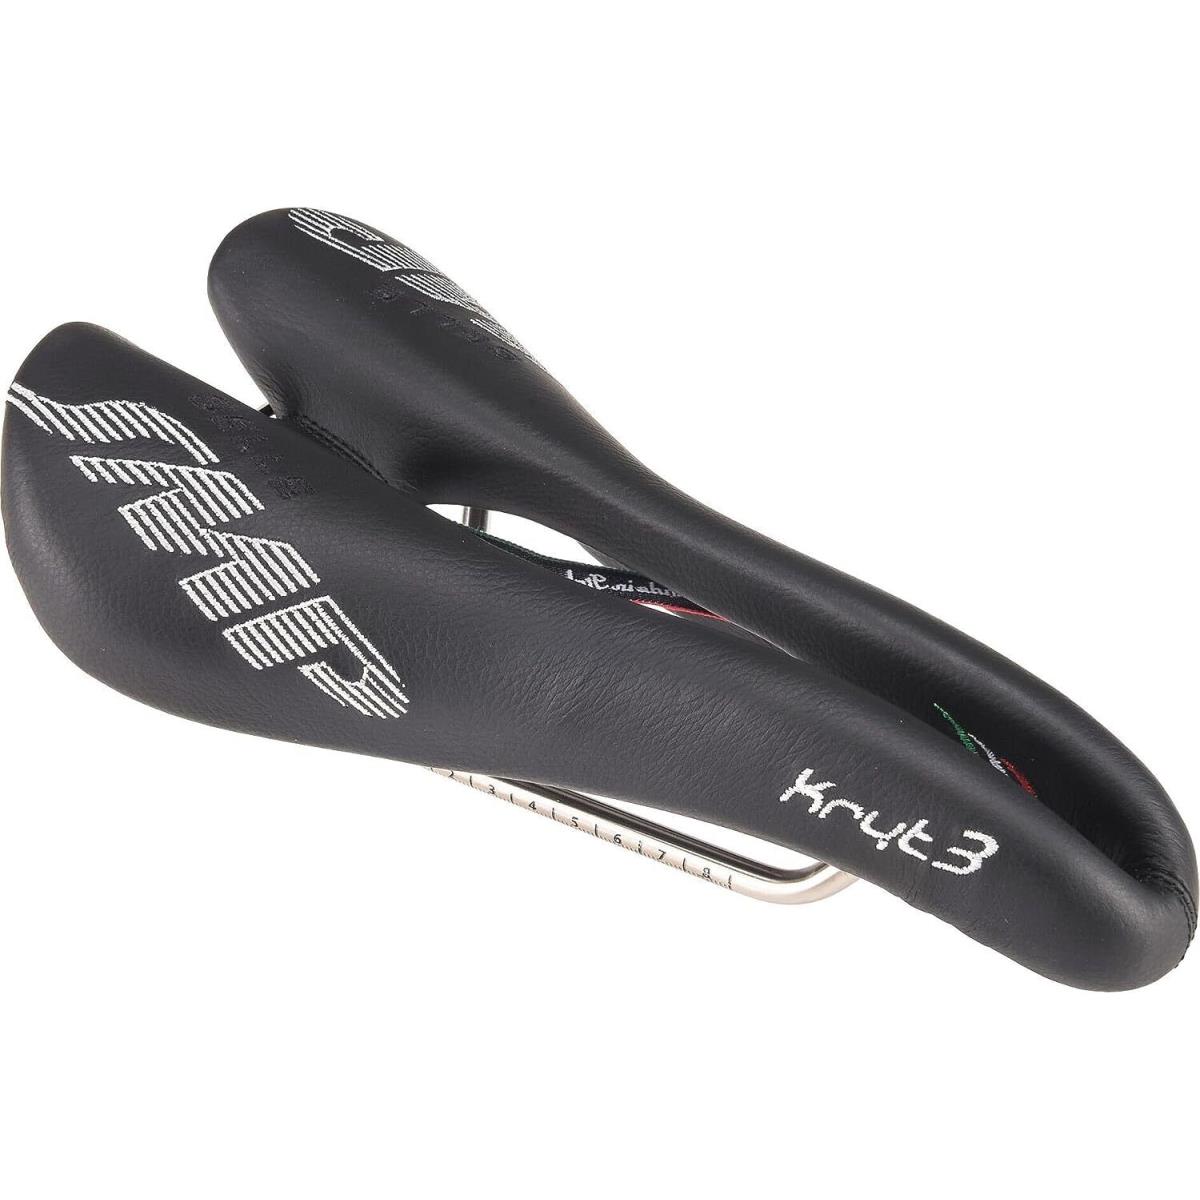 Selle Smp Kryt 3 Crit Bicycle Saddle Seat Italy Steel Leather Foamed Elastomer